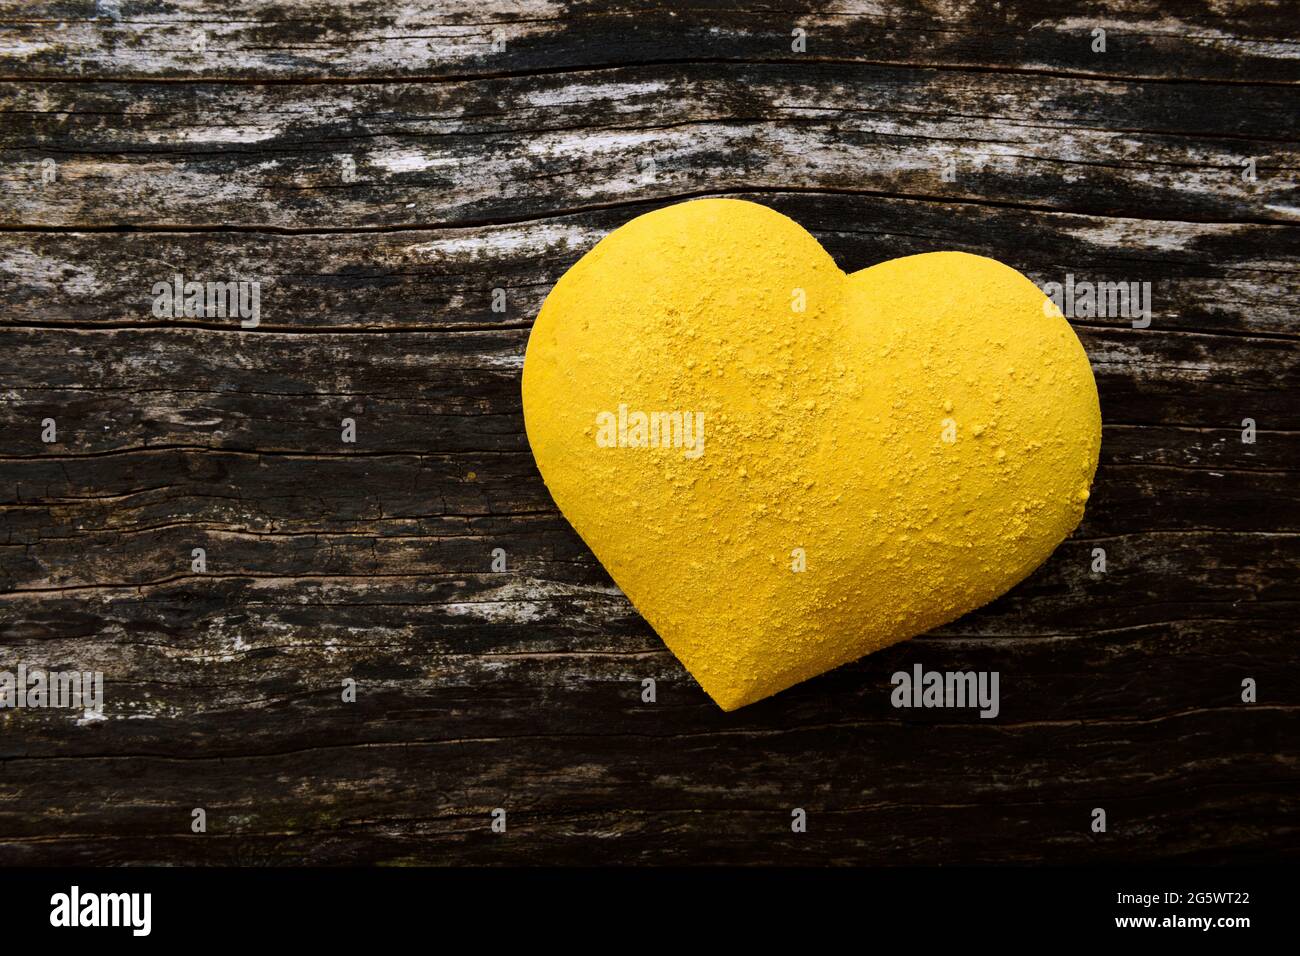 3 dimensional heart shape painted yellow, and sprinkled with dry pigment, on background of weathered wood. Stock Photo